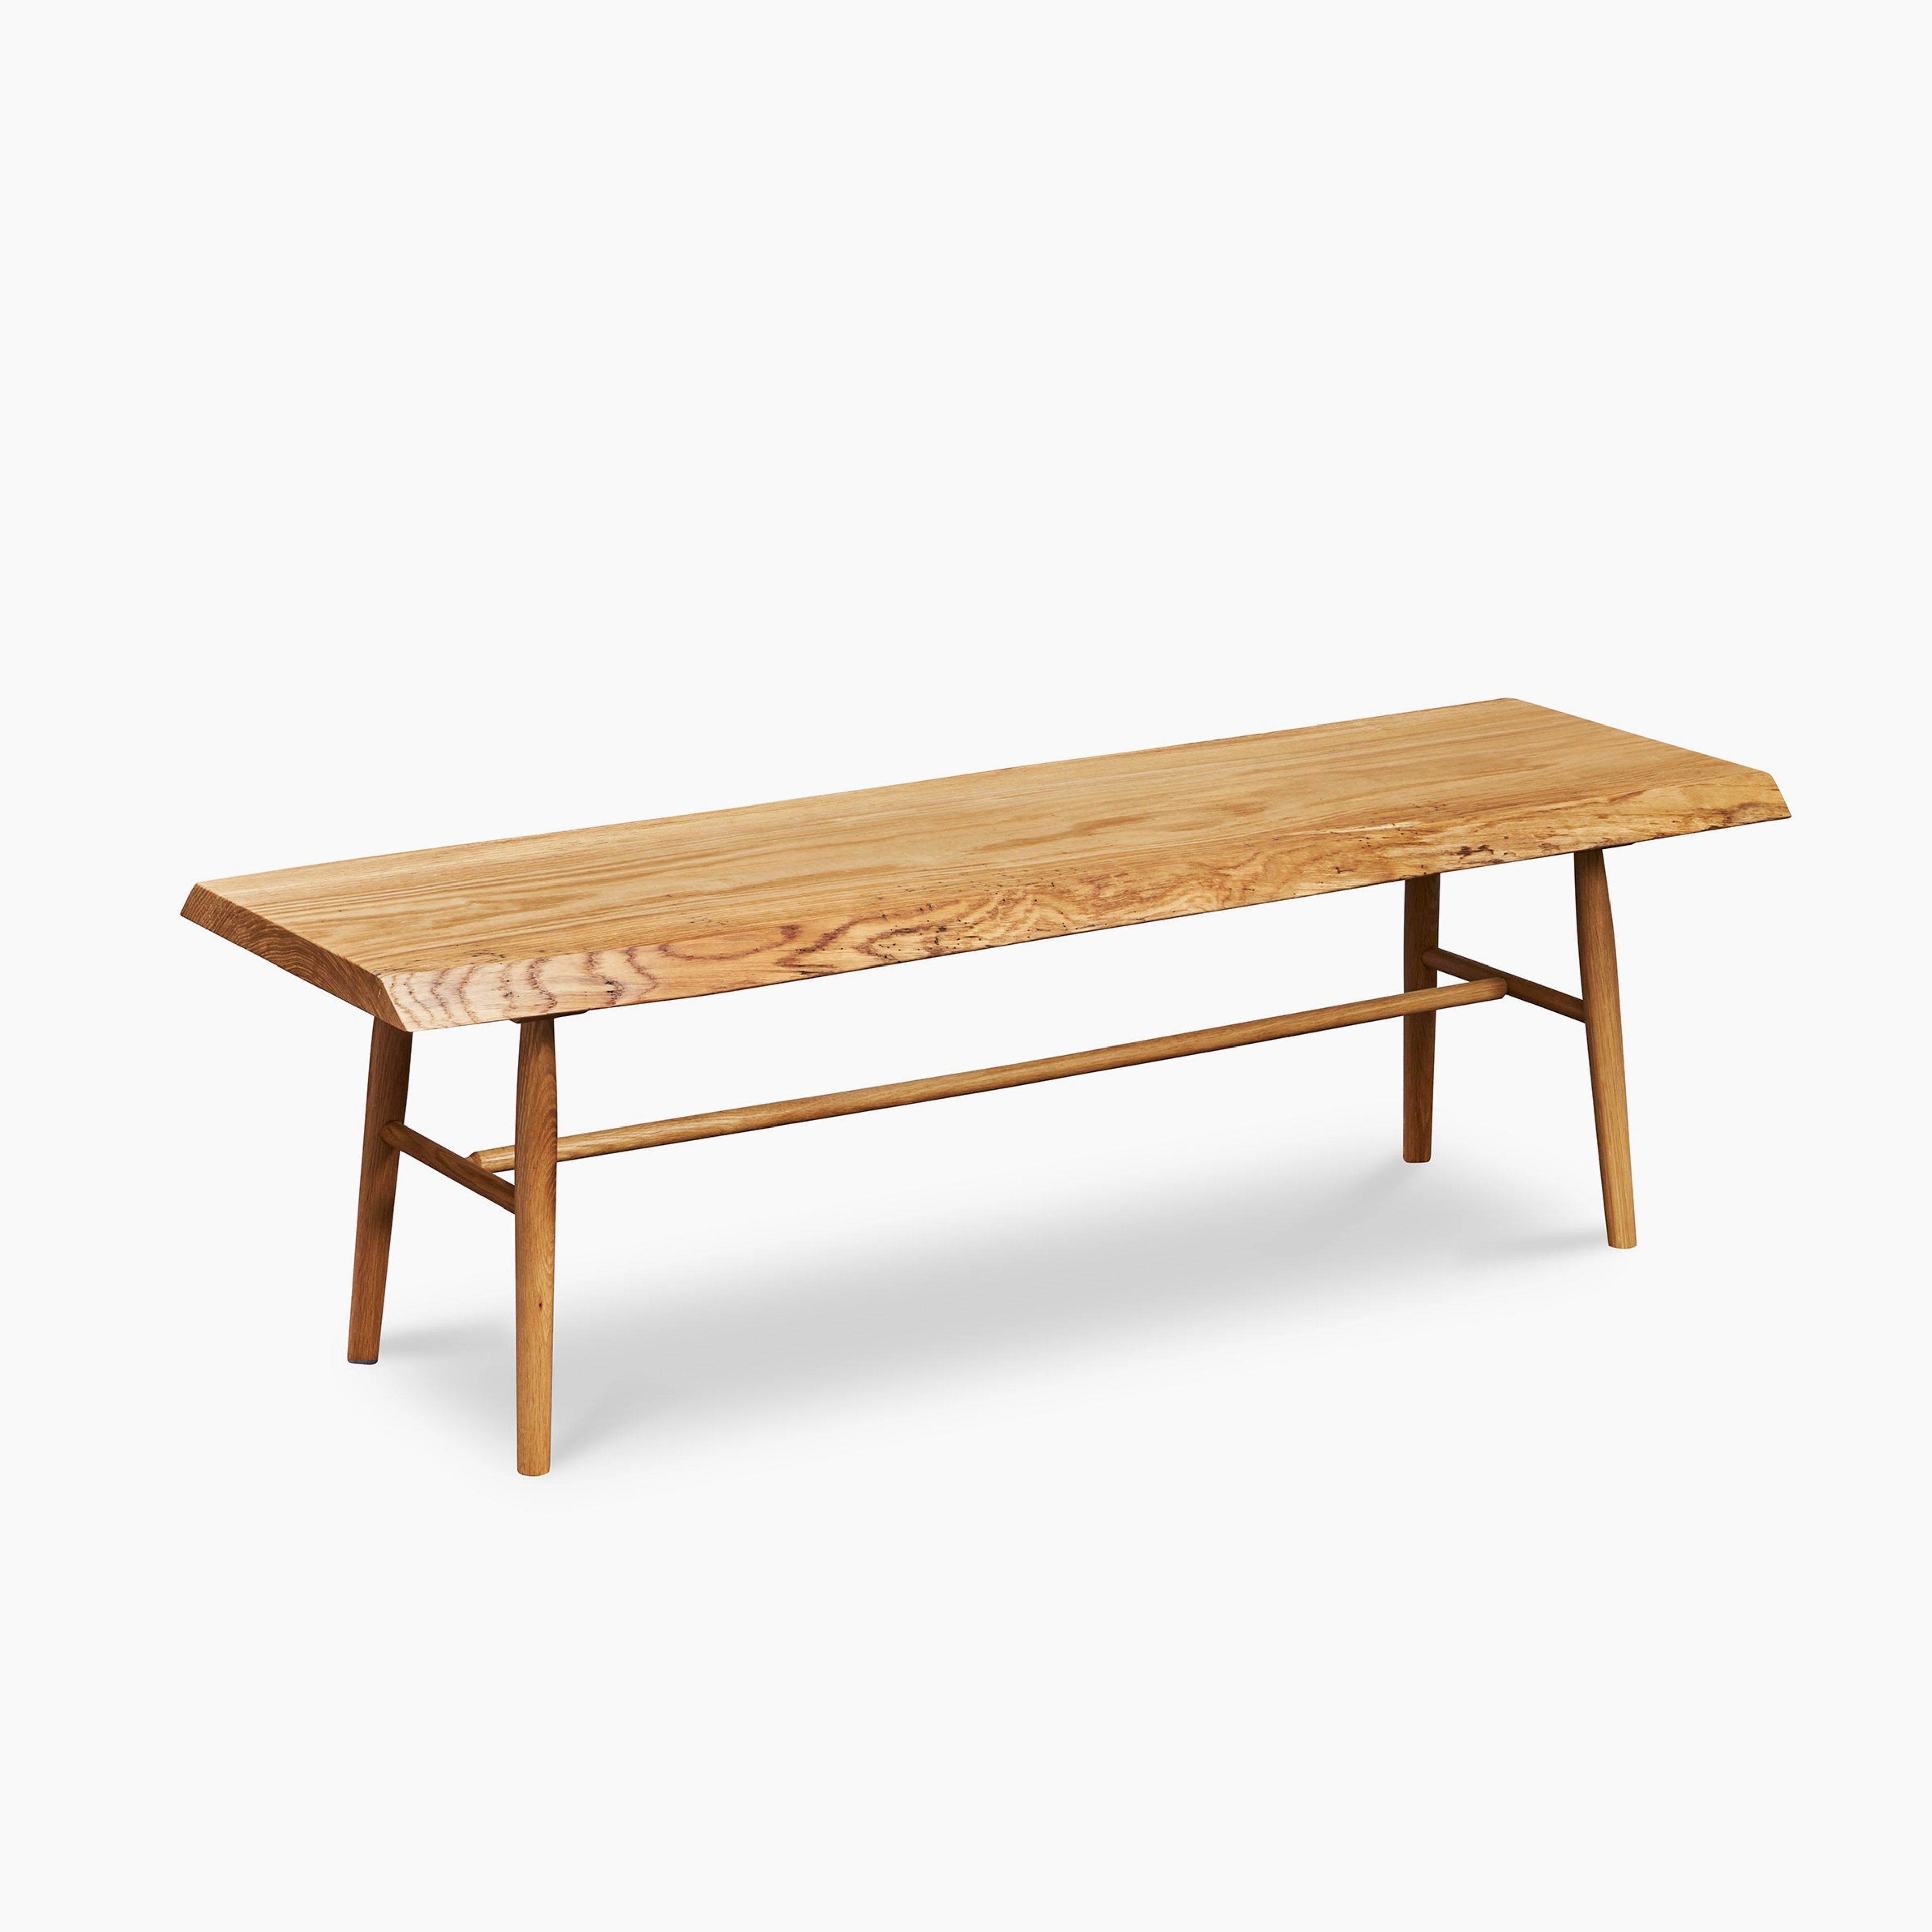 Live Edge Slab Coffee Table or Bench